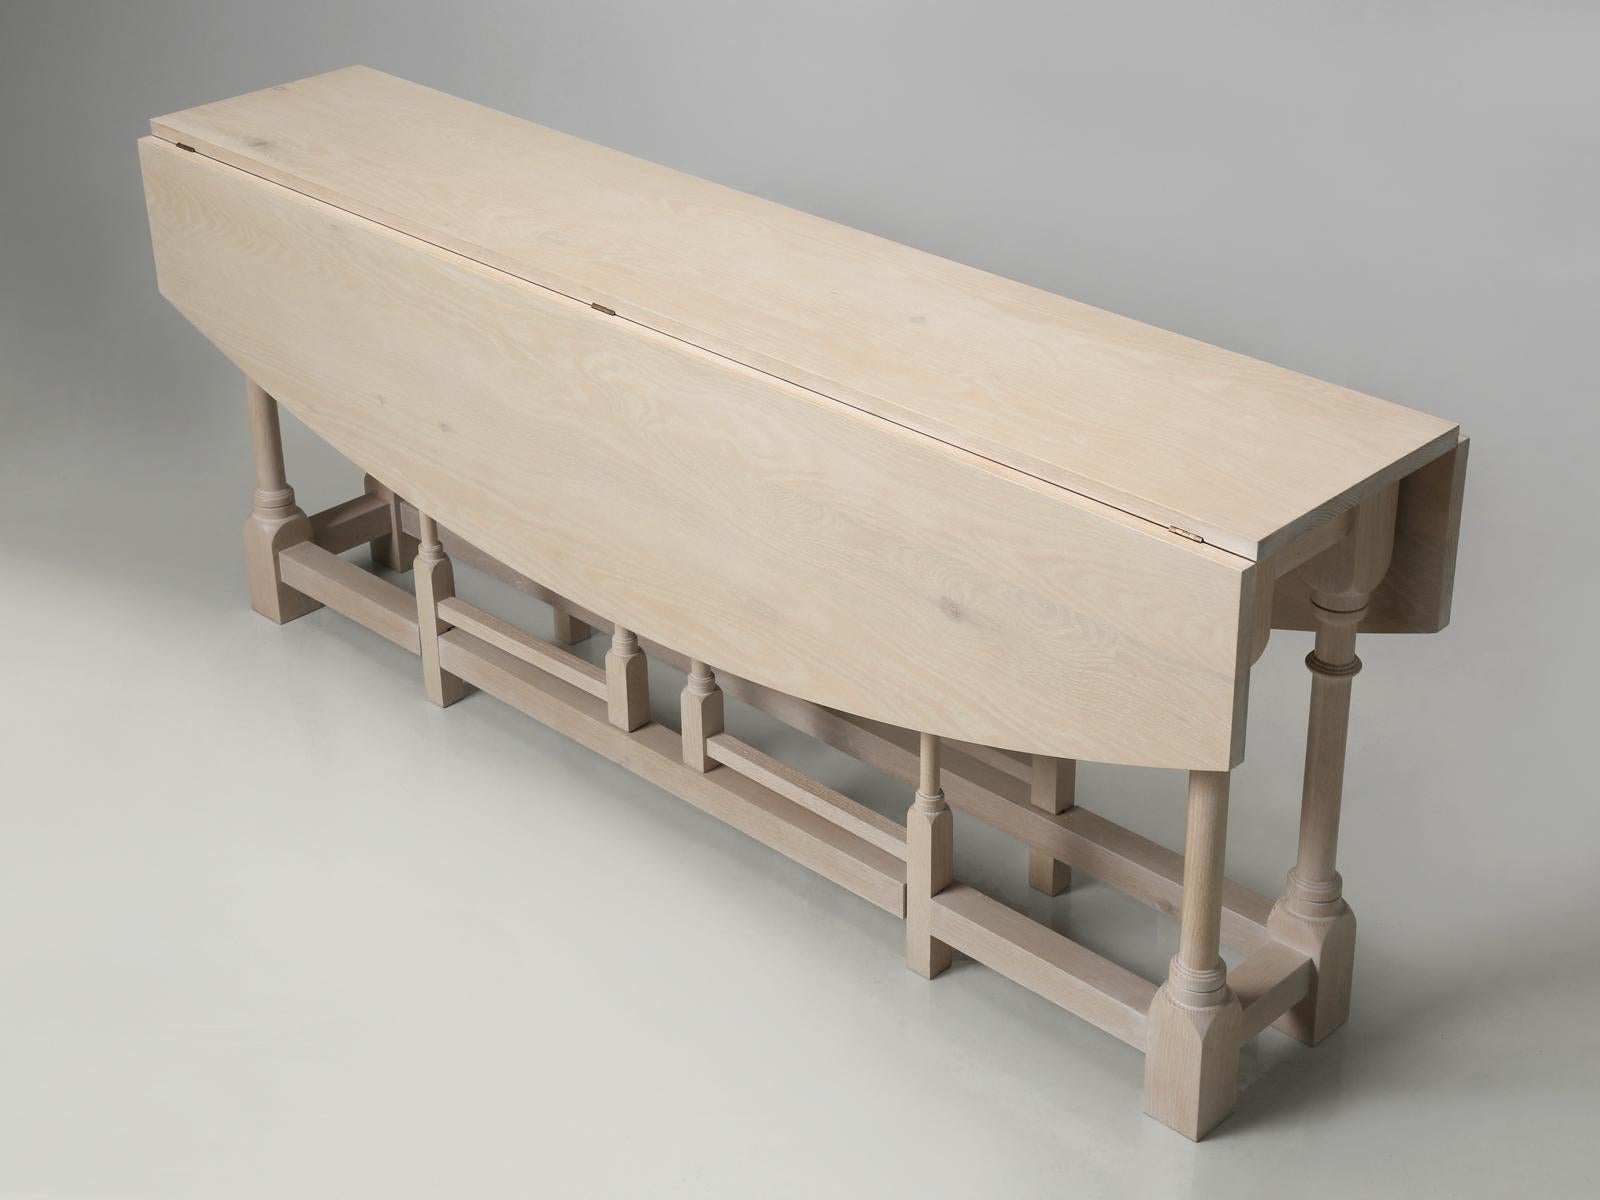 Drop-leaf dining table hand-made in our Chicago based workshop from hand-picked rift-cut white oak lumber. Our drop-leaf was designed narrow enough to be used as a sofa table or console table. Dimensions, wood species, finishes can all be modified